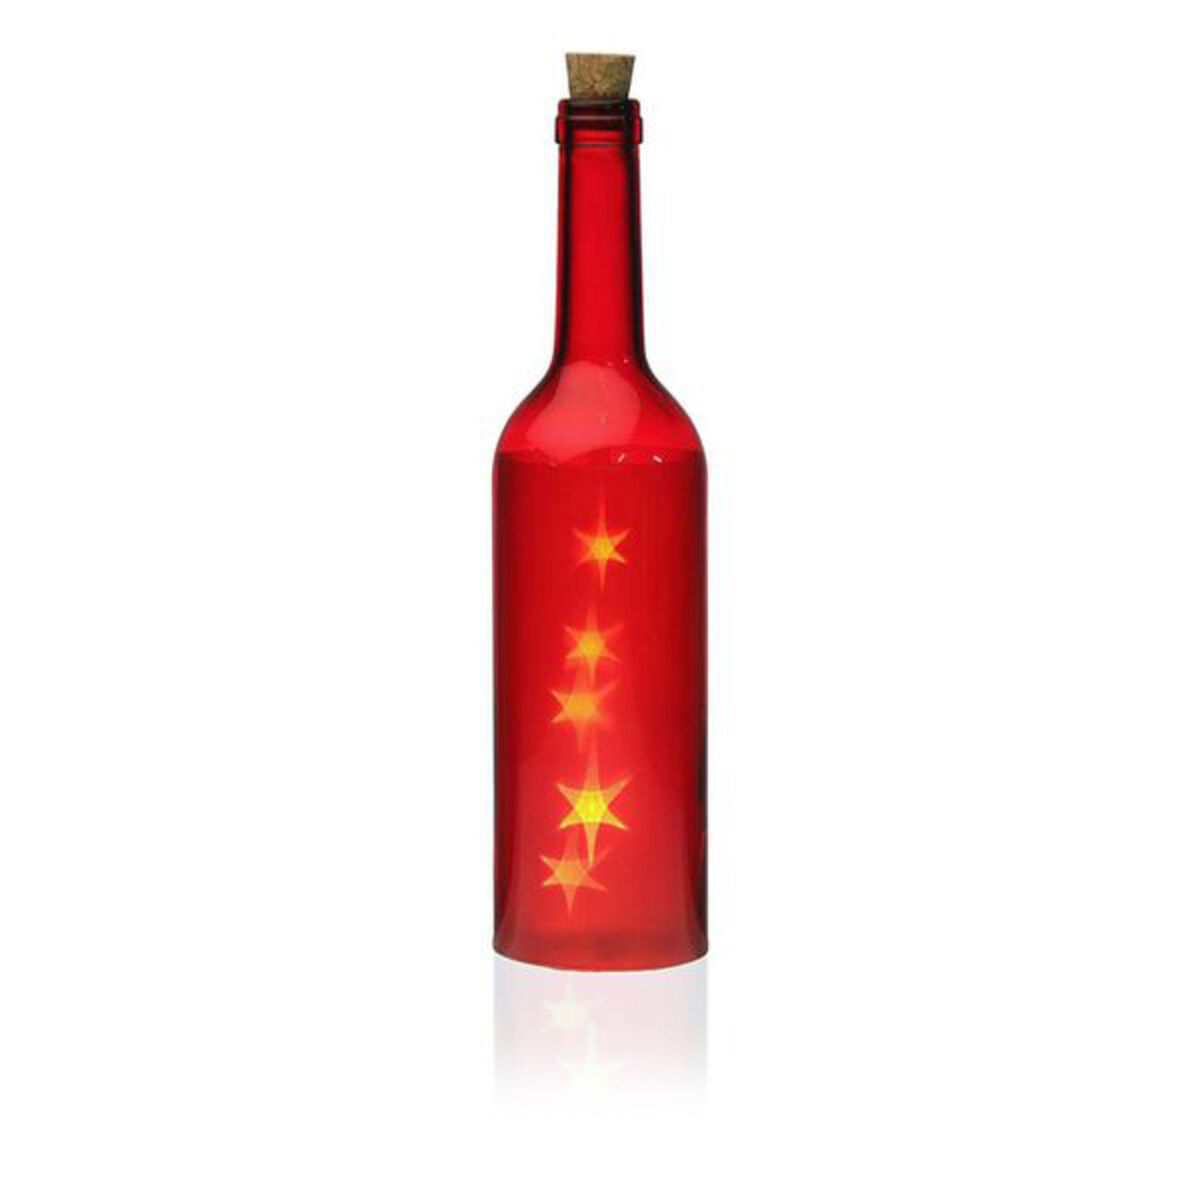 Bouteille LED Versa Cosmo Rouge Verre (7,3 x 28 x 7,3 cm)